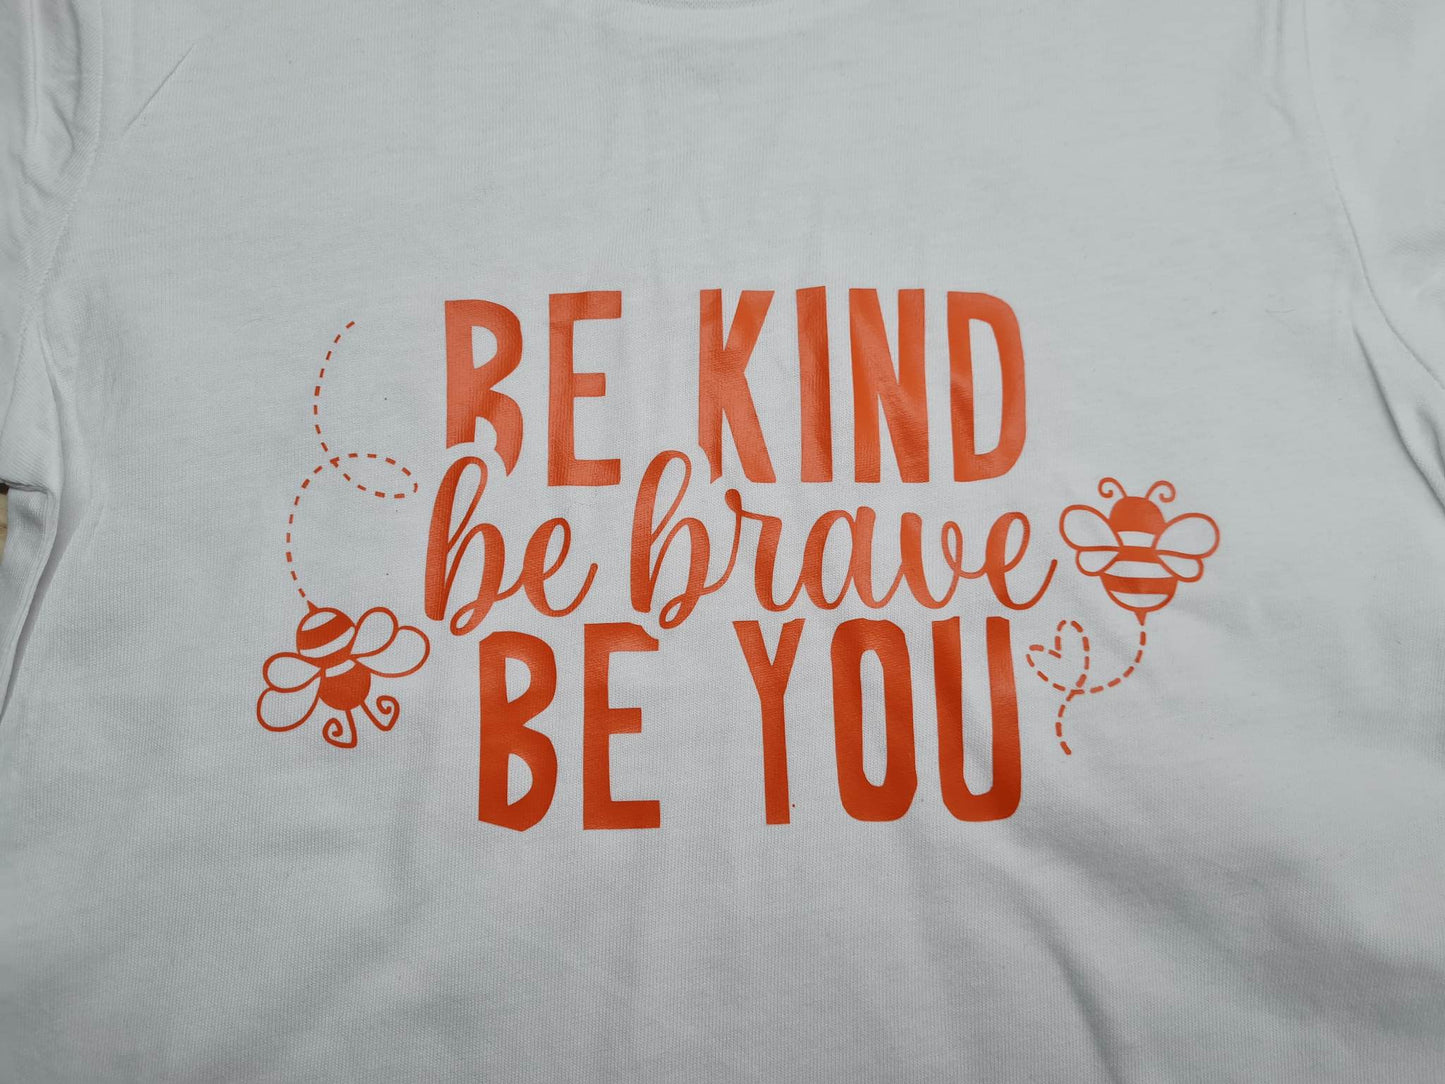 Kids Harmony Day Shirt - Be Kind Be Brave Be You